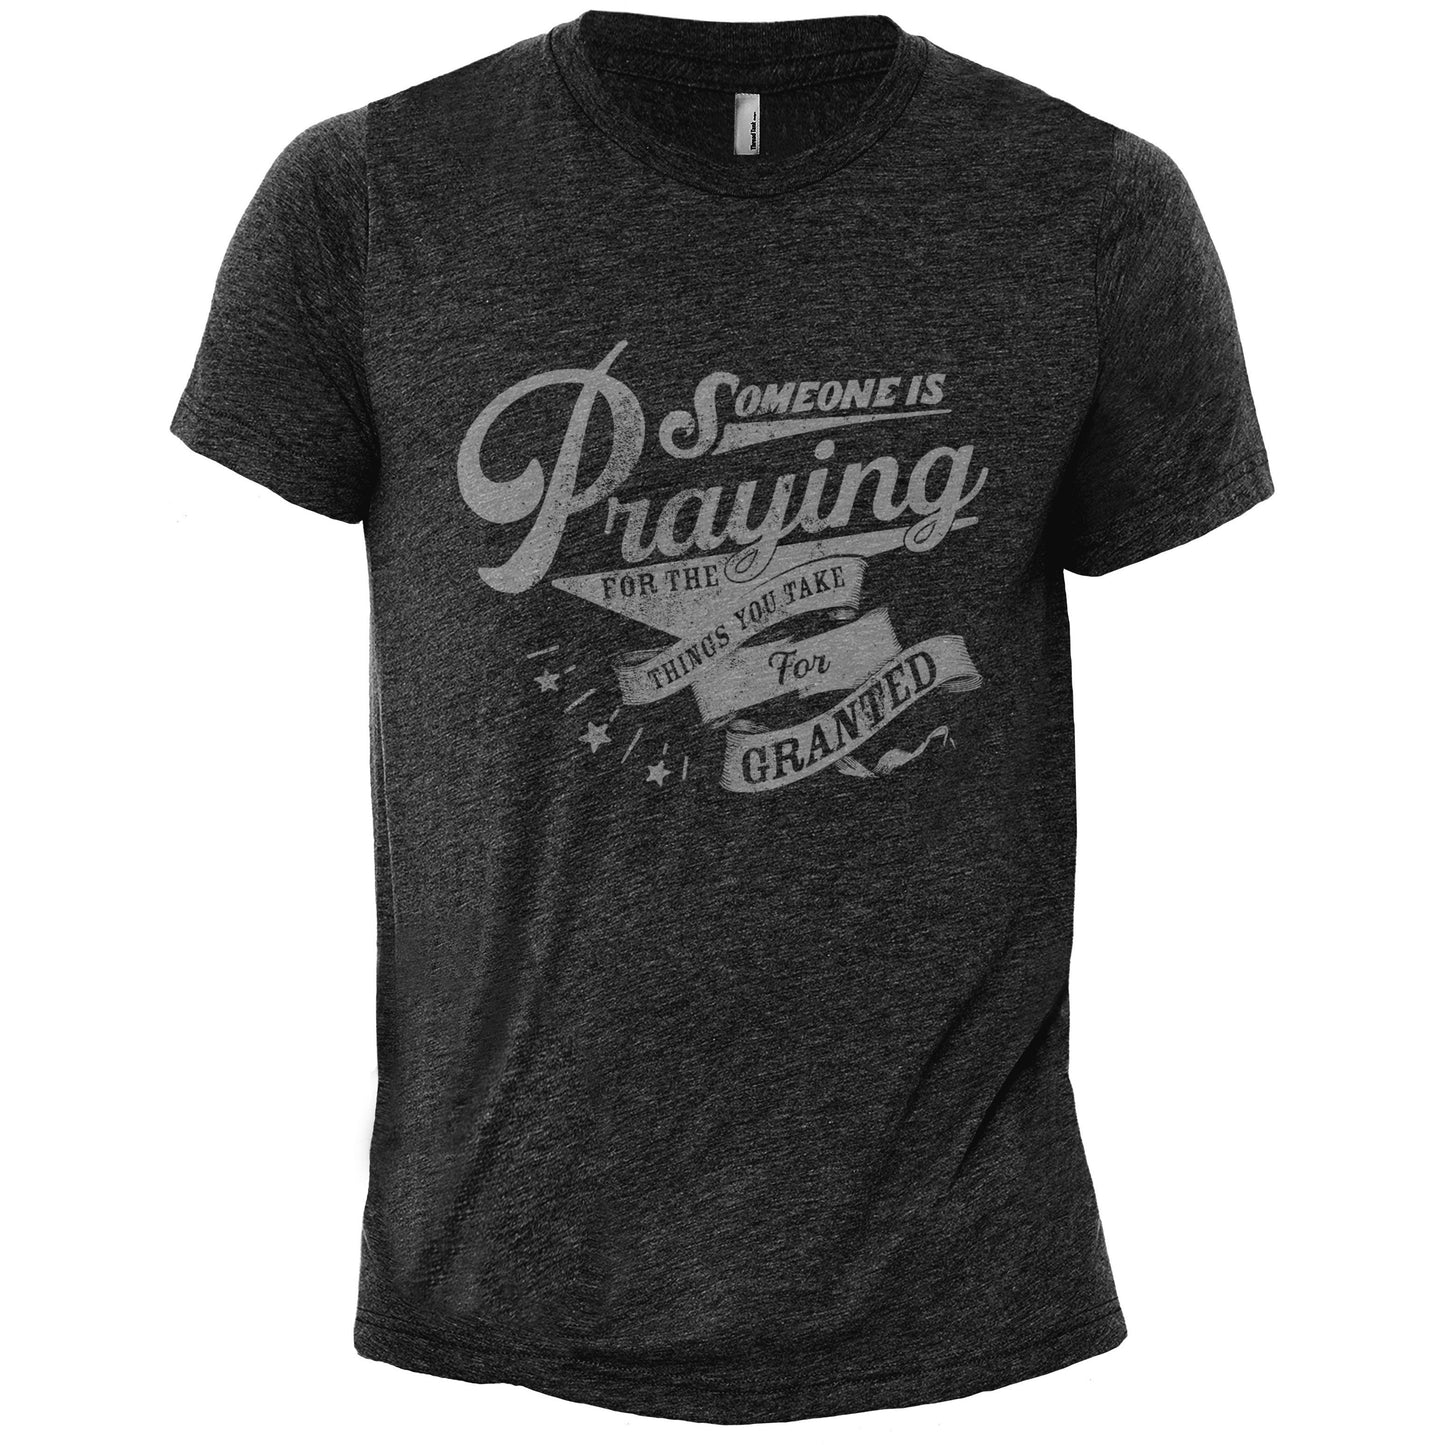 Someone Is Praying For The Things You Take For Granted - Stories You Can Wear